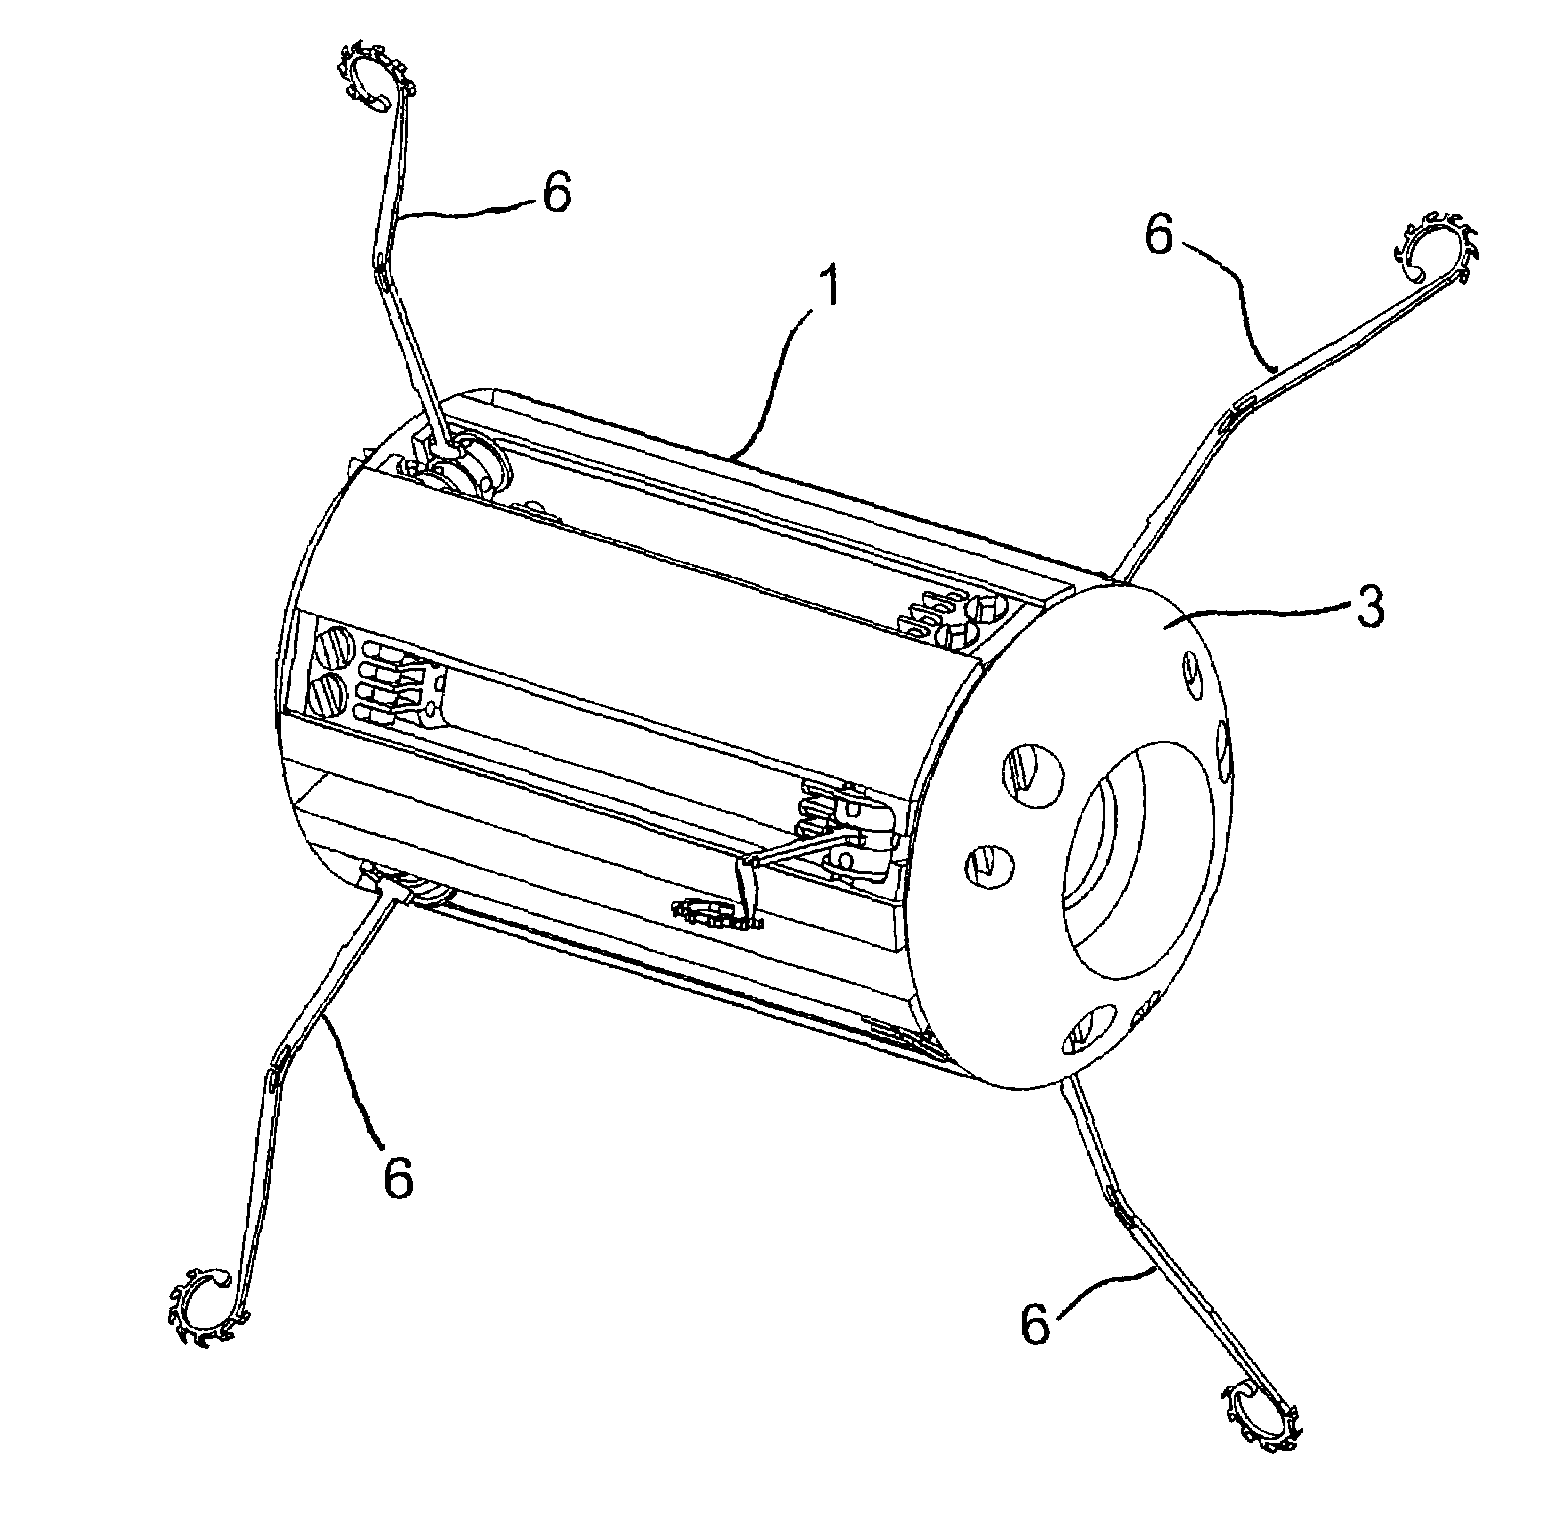 Teleoperated endoscopic capsule equipped with active locomotion system